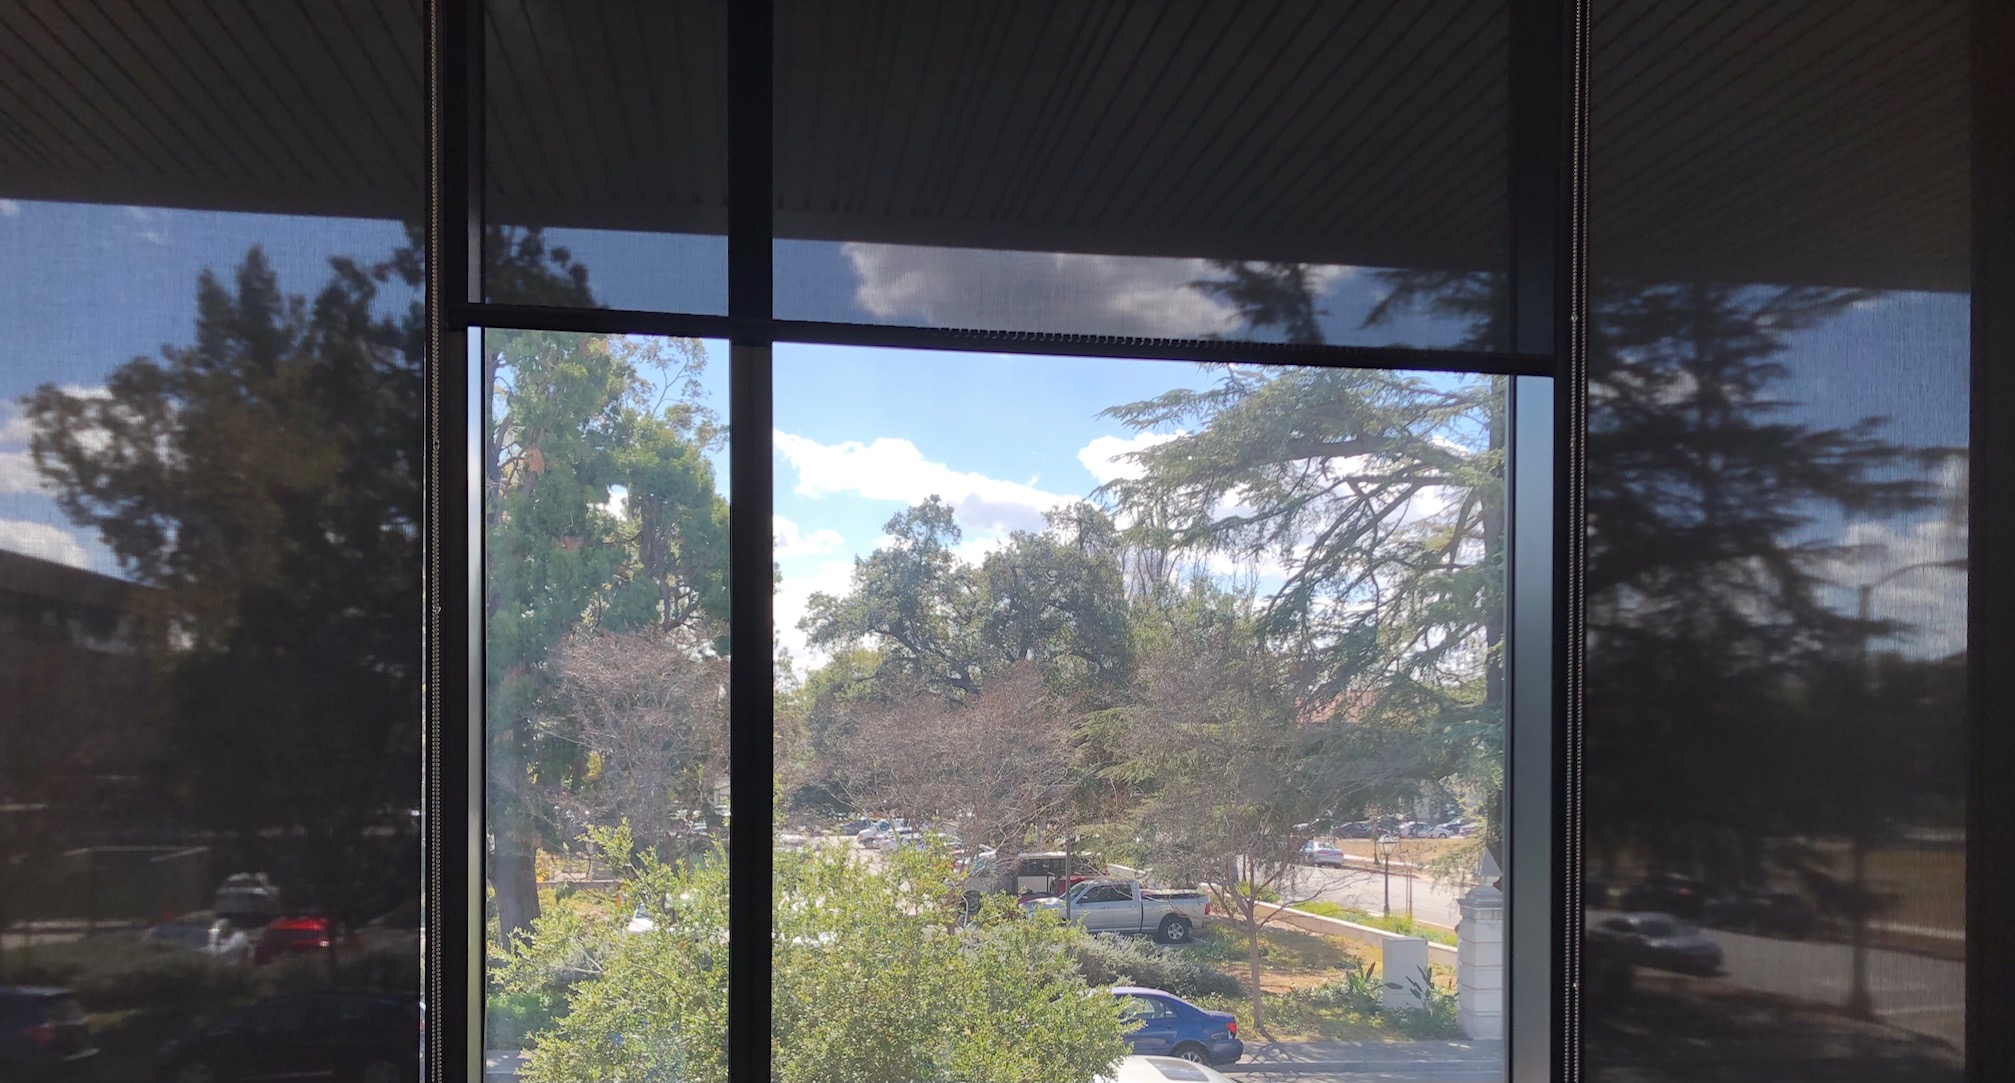 view from window to trees and parking lot